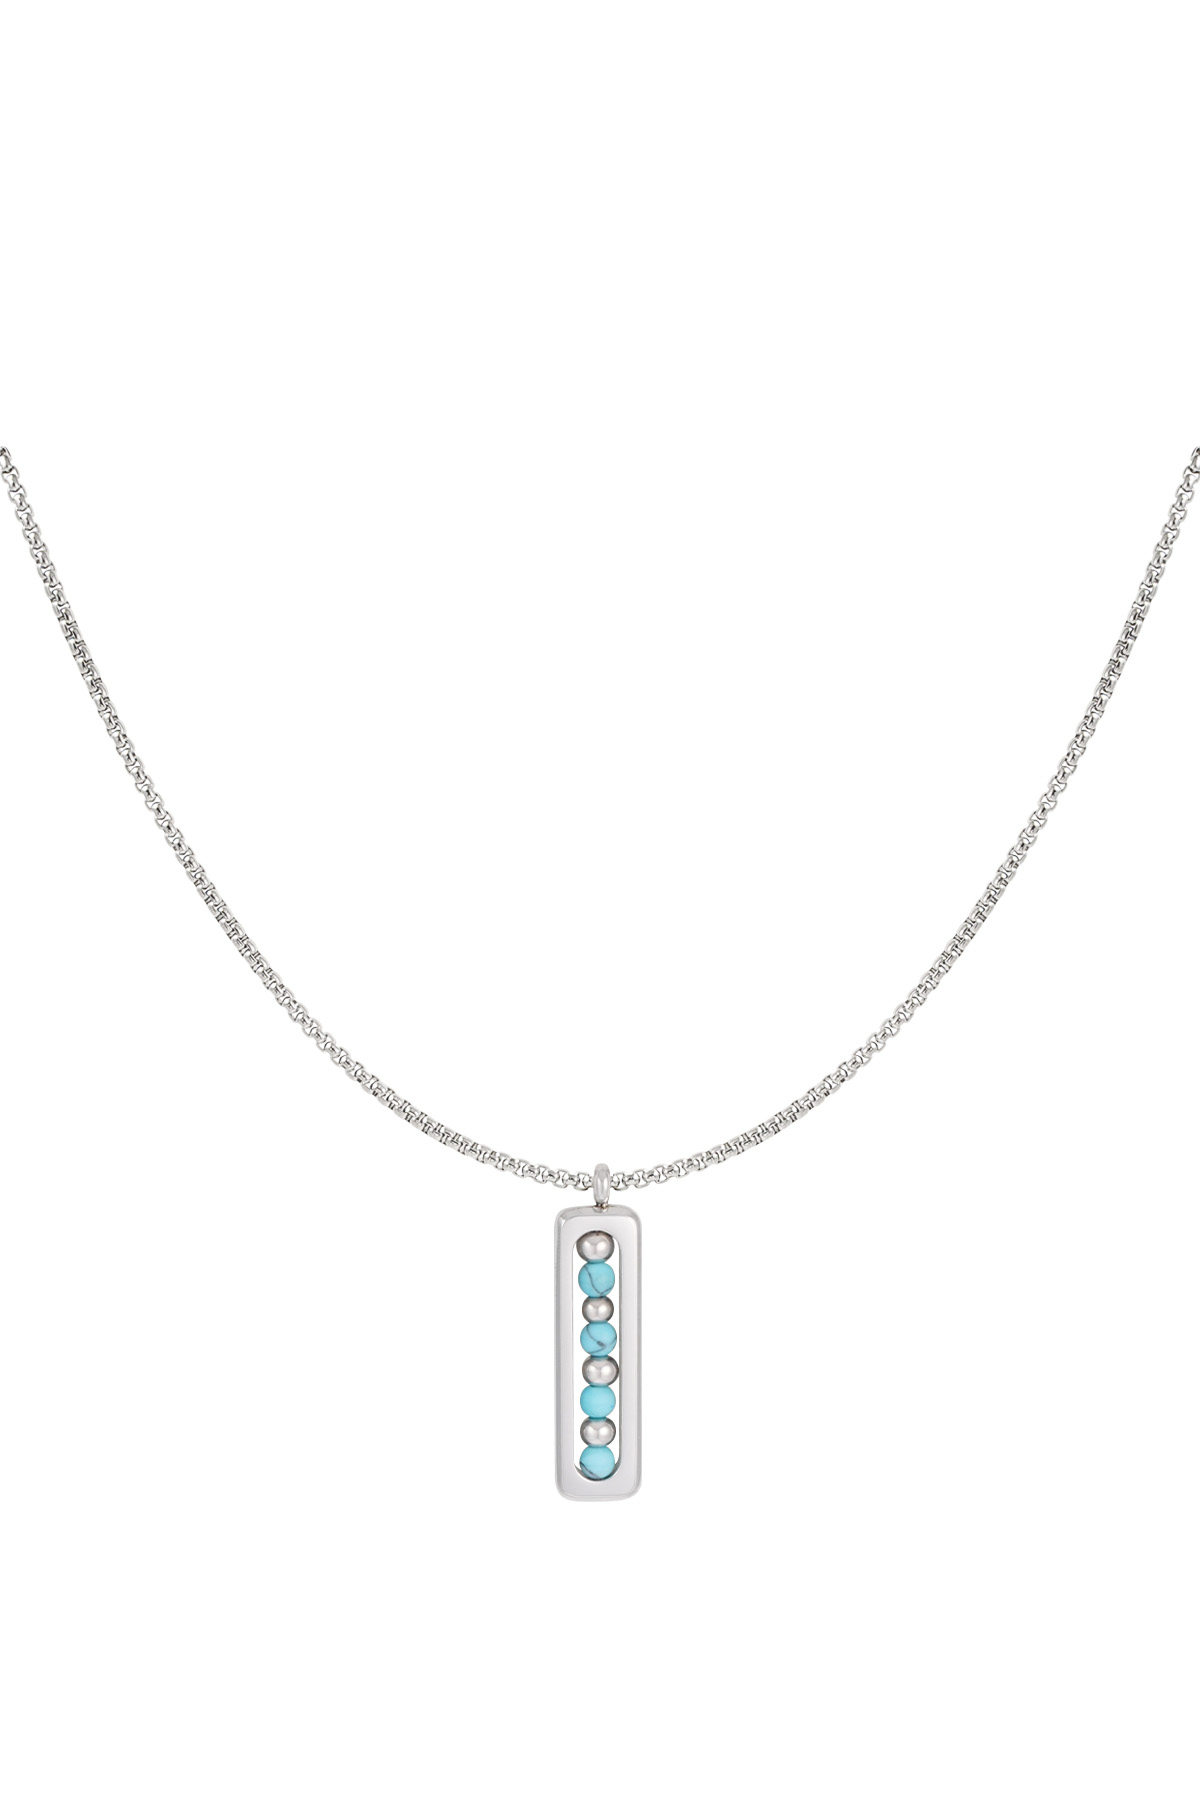 Men's necklace with ball charm - turquoise 